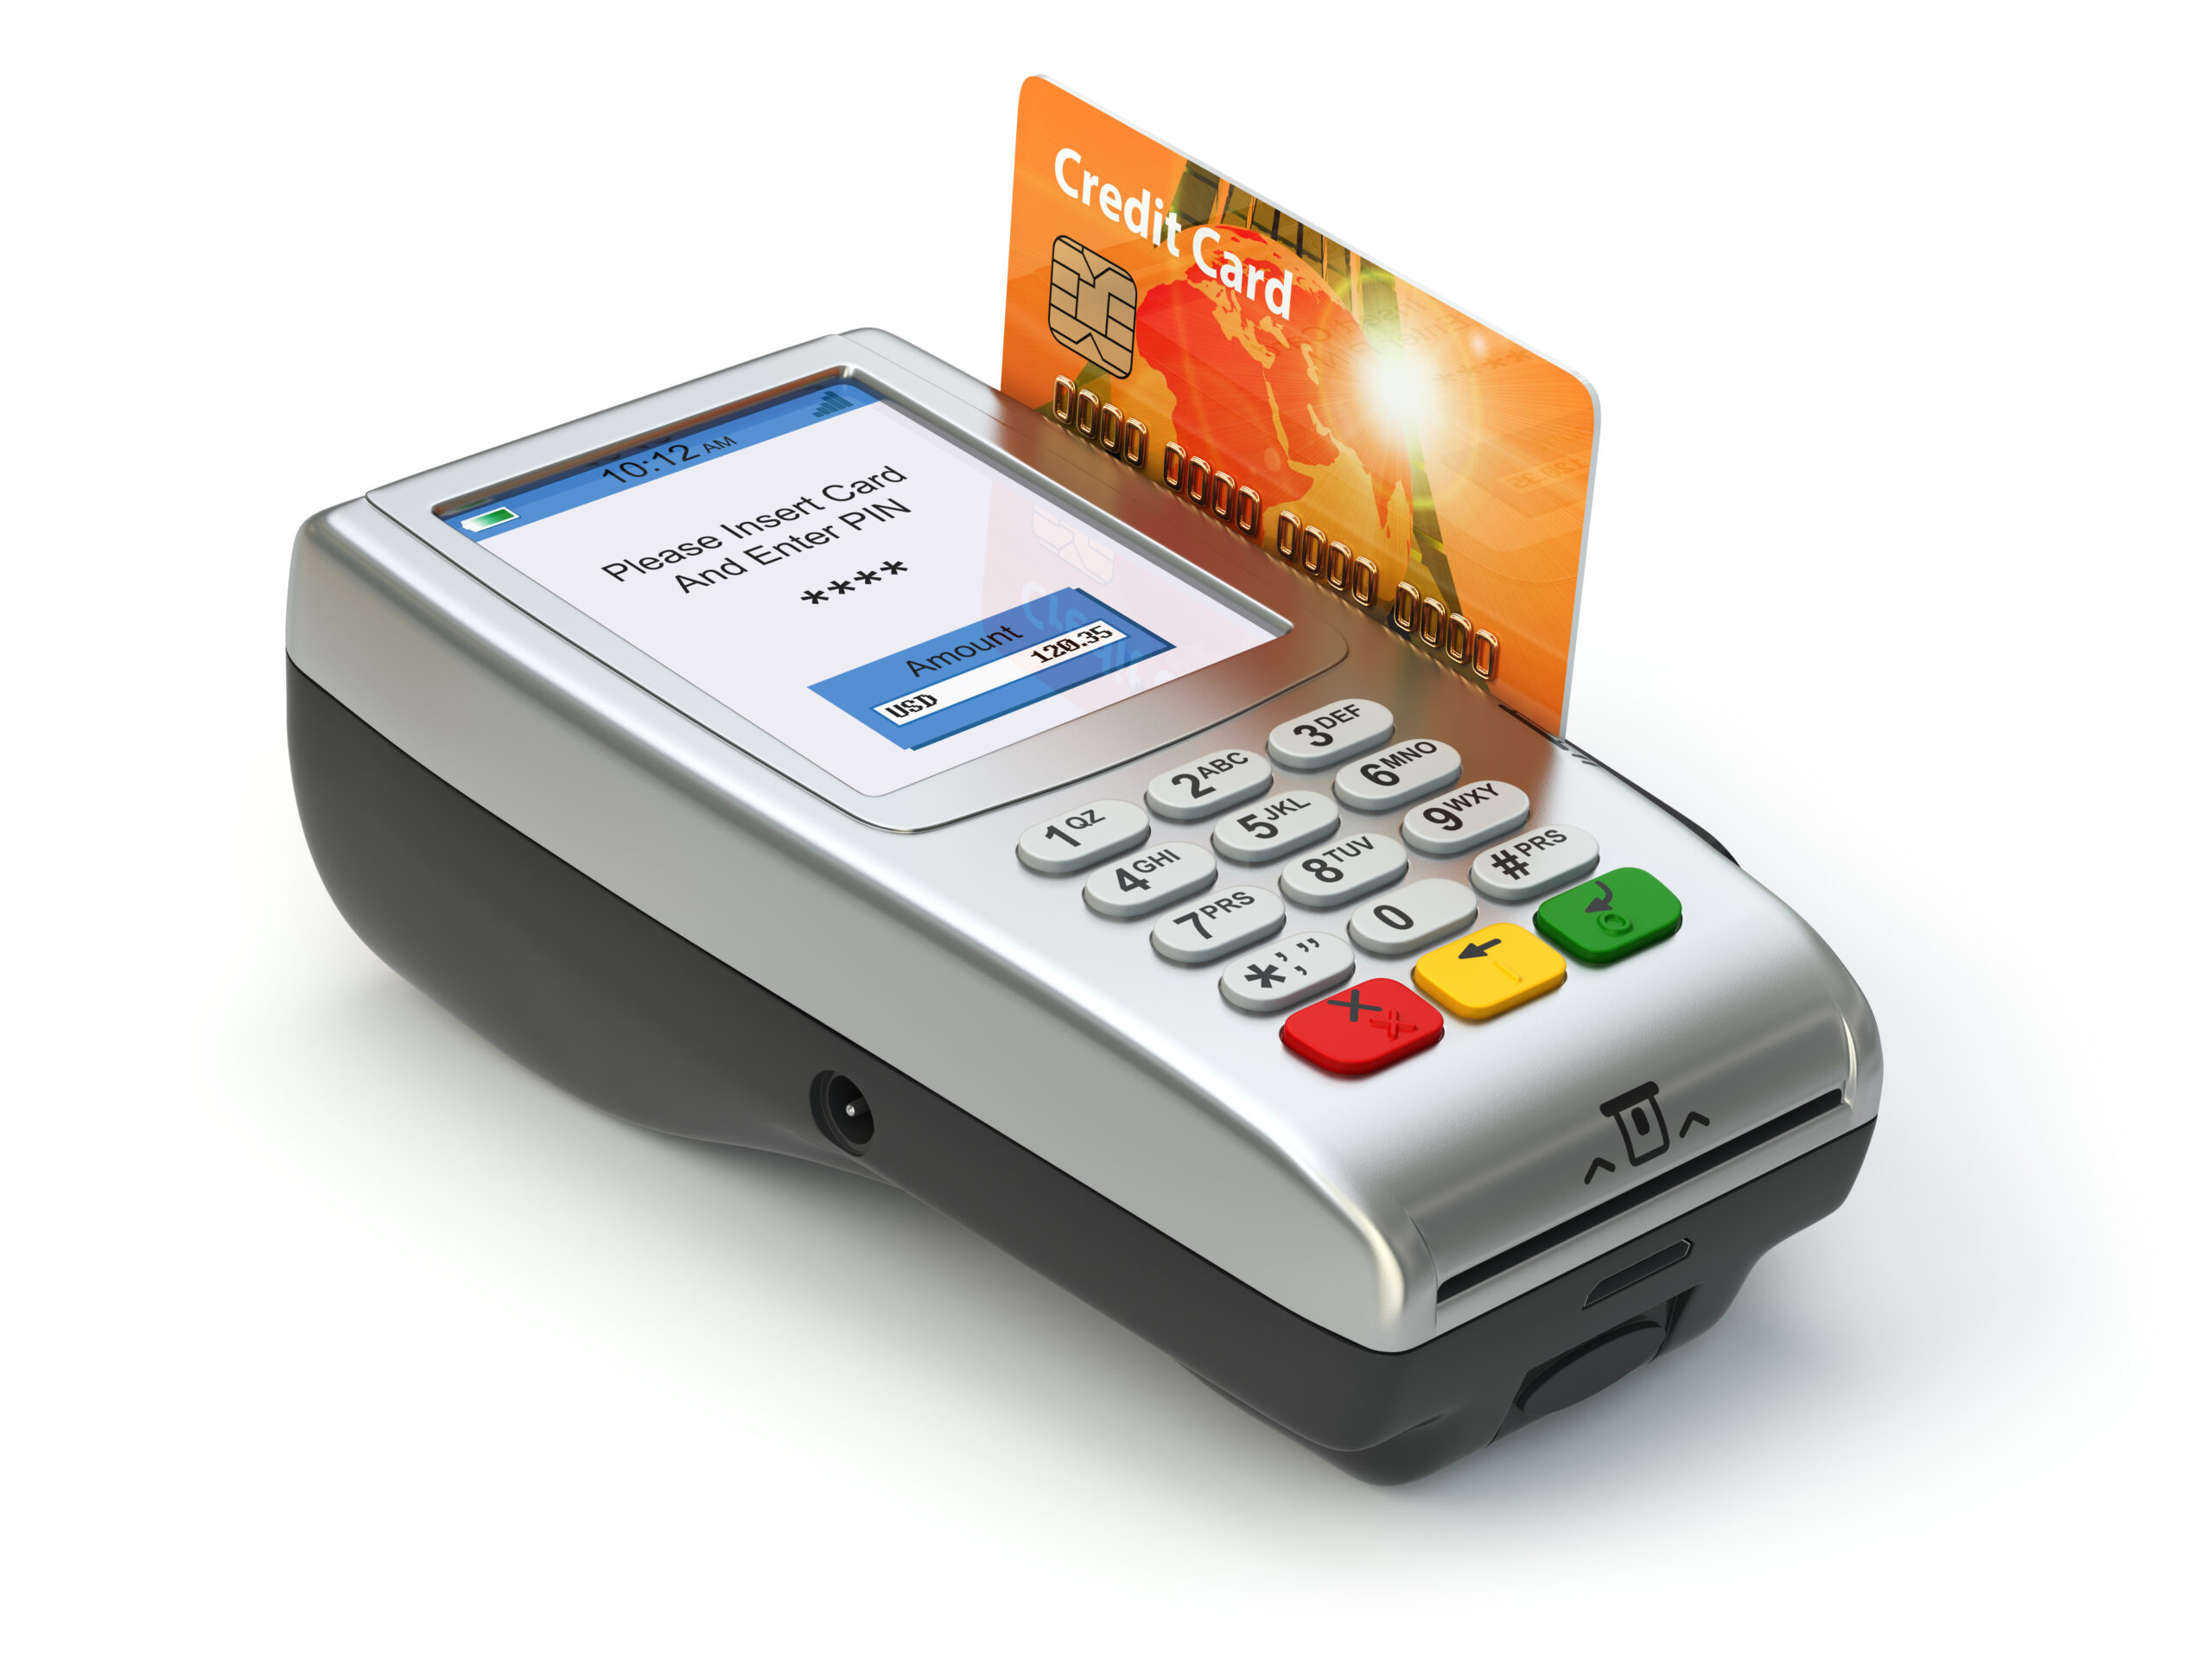 How to register and activate Kudi POS machine